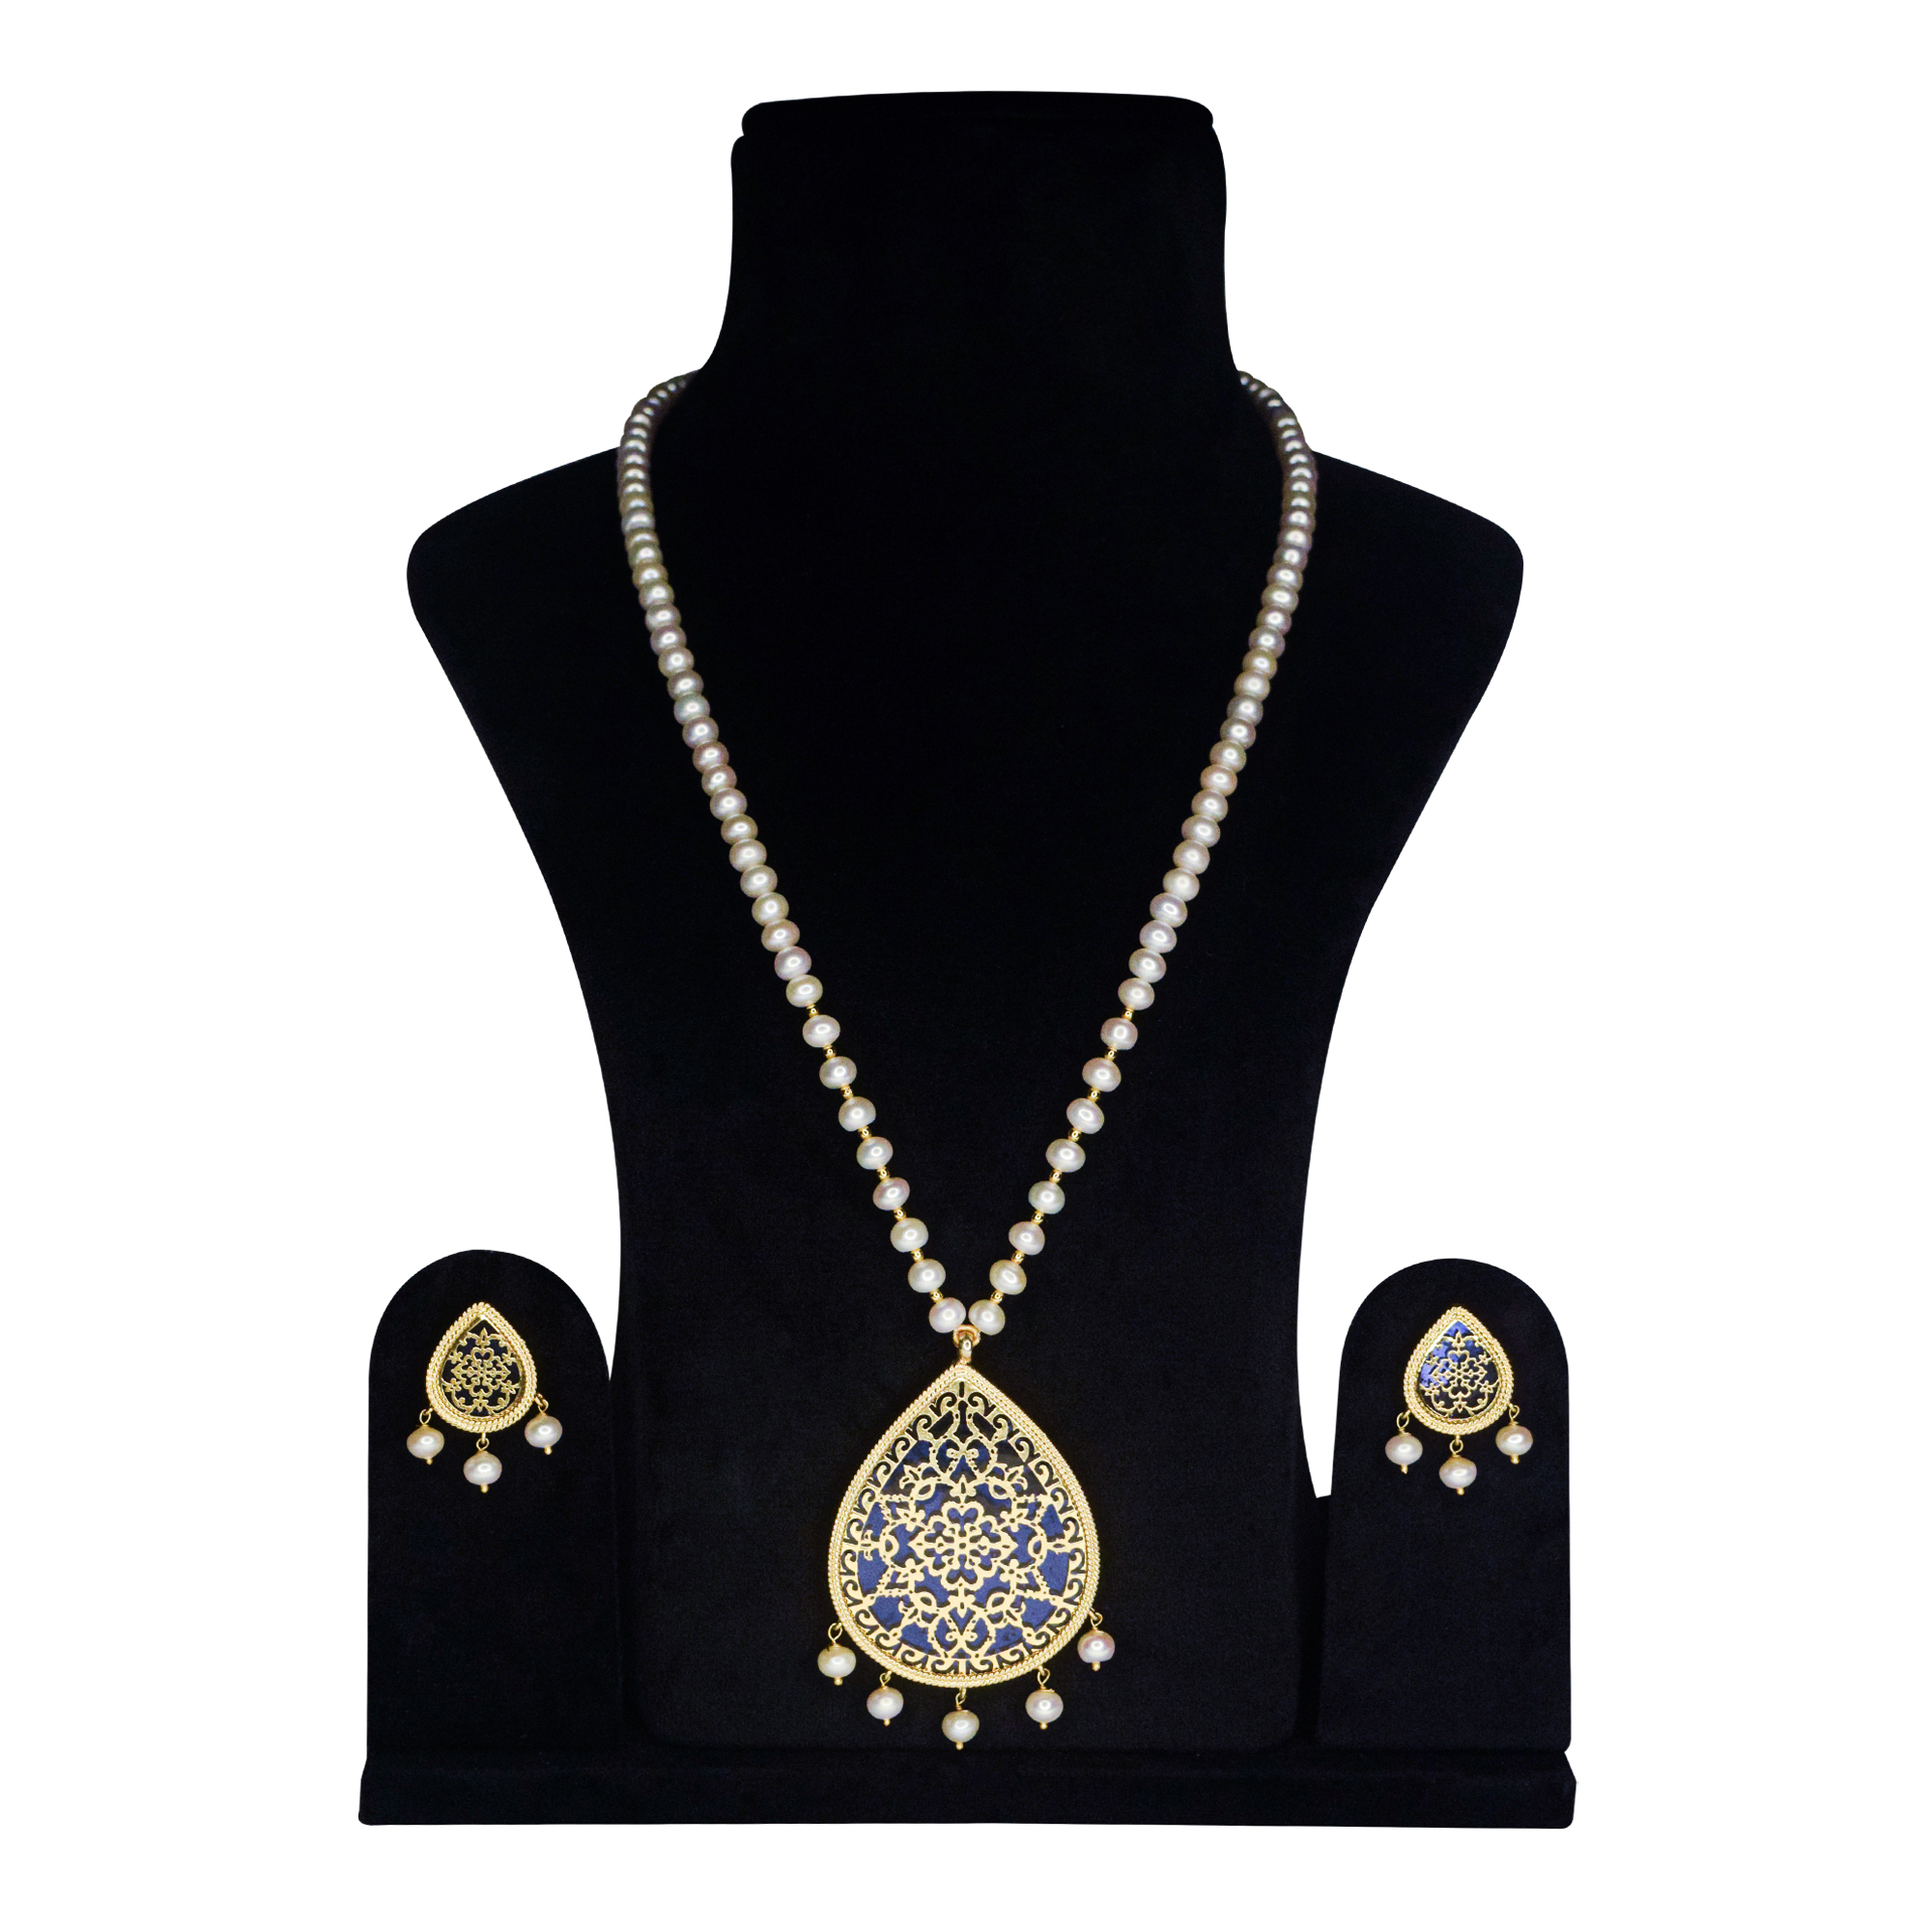 Buy WONDER CHOICE Blue White Kundhan Fashion Jewelry Fancy Necklace Sets  Kundan Traditional Jewellery Set with Mangtikka & Earrings for Women. at  Amazon.in